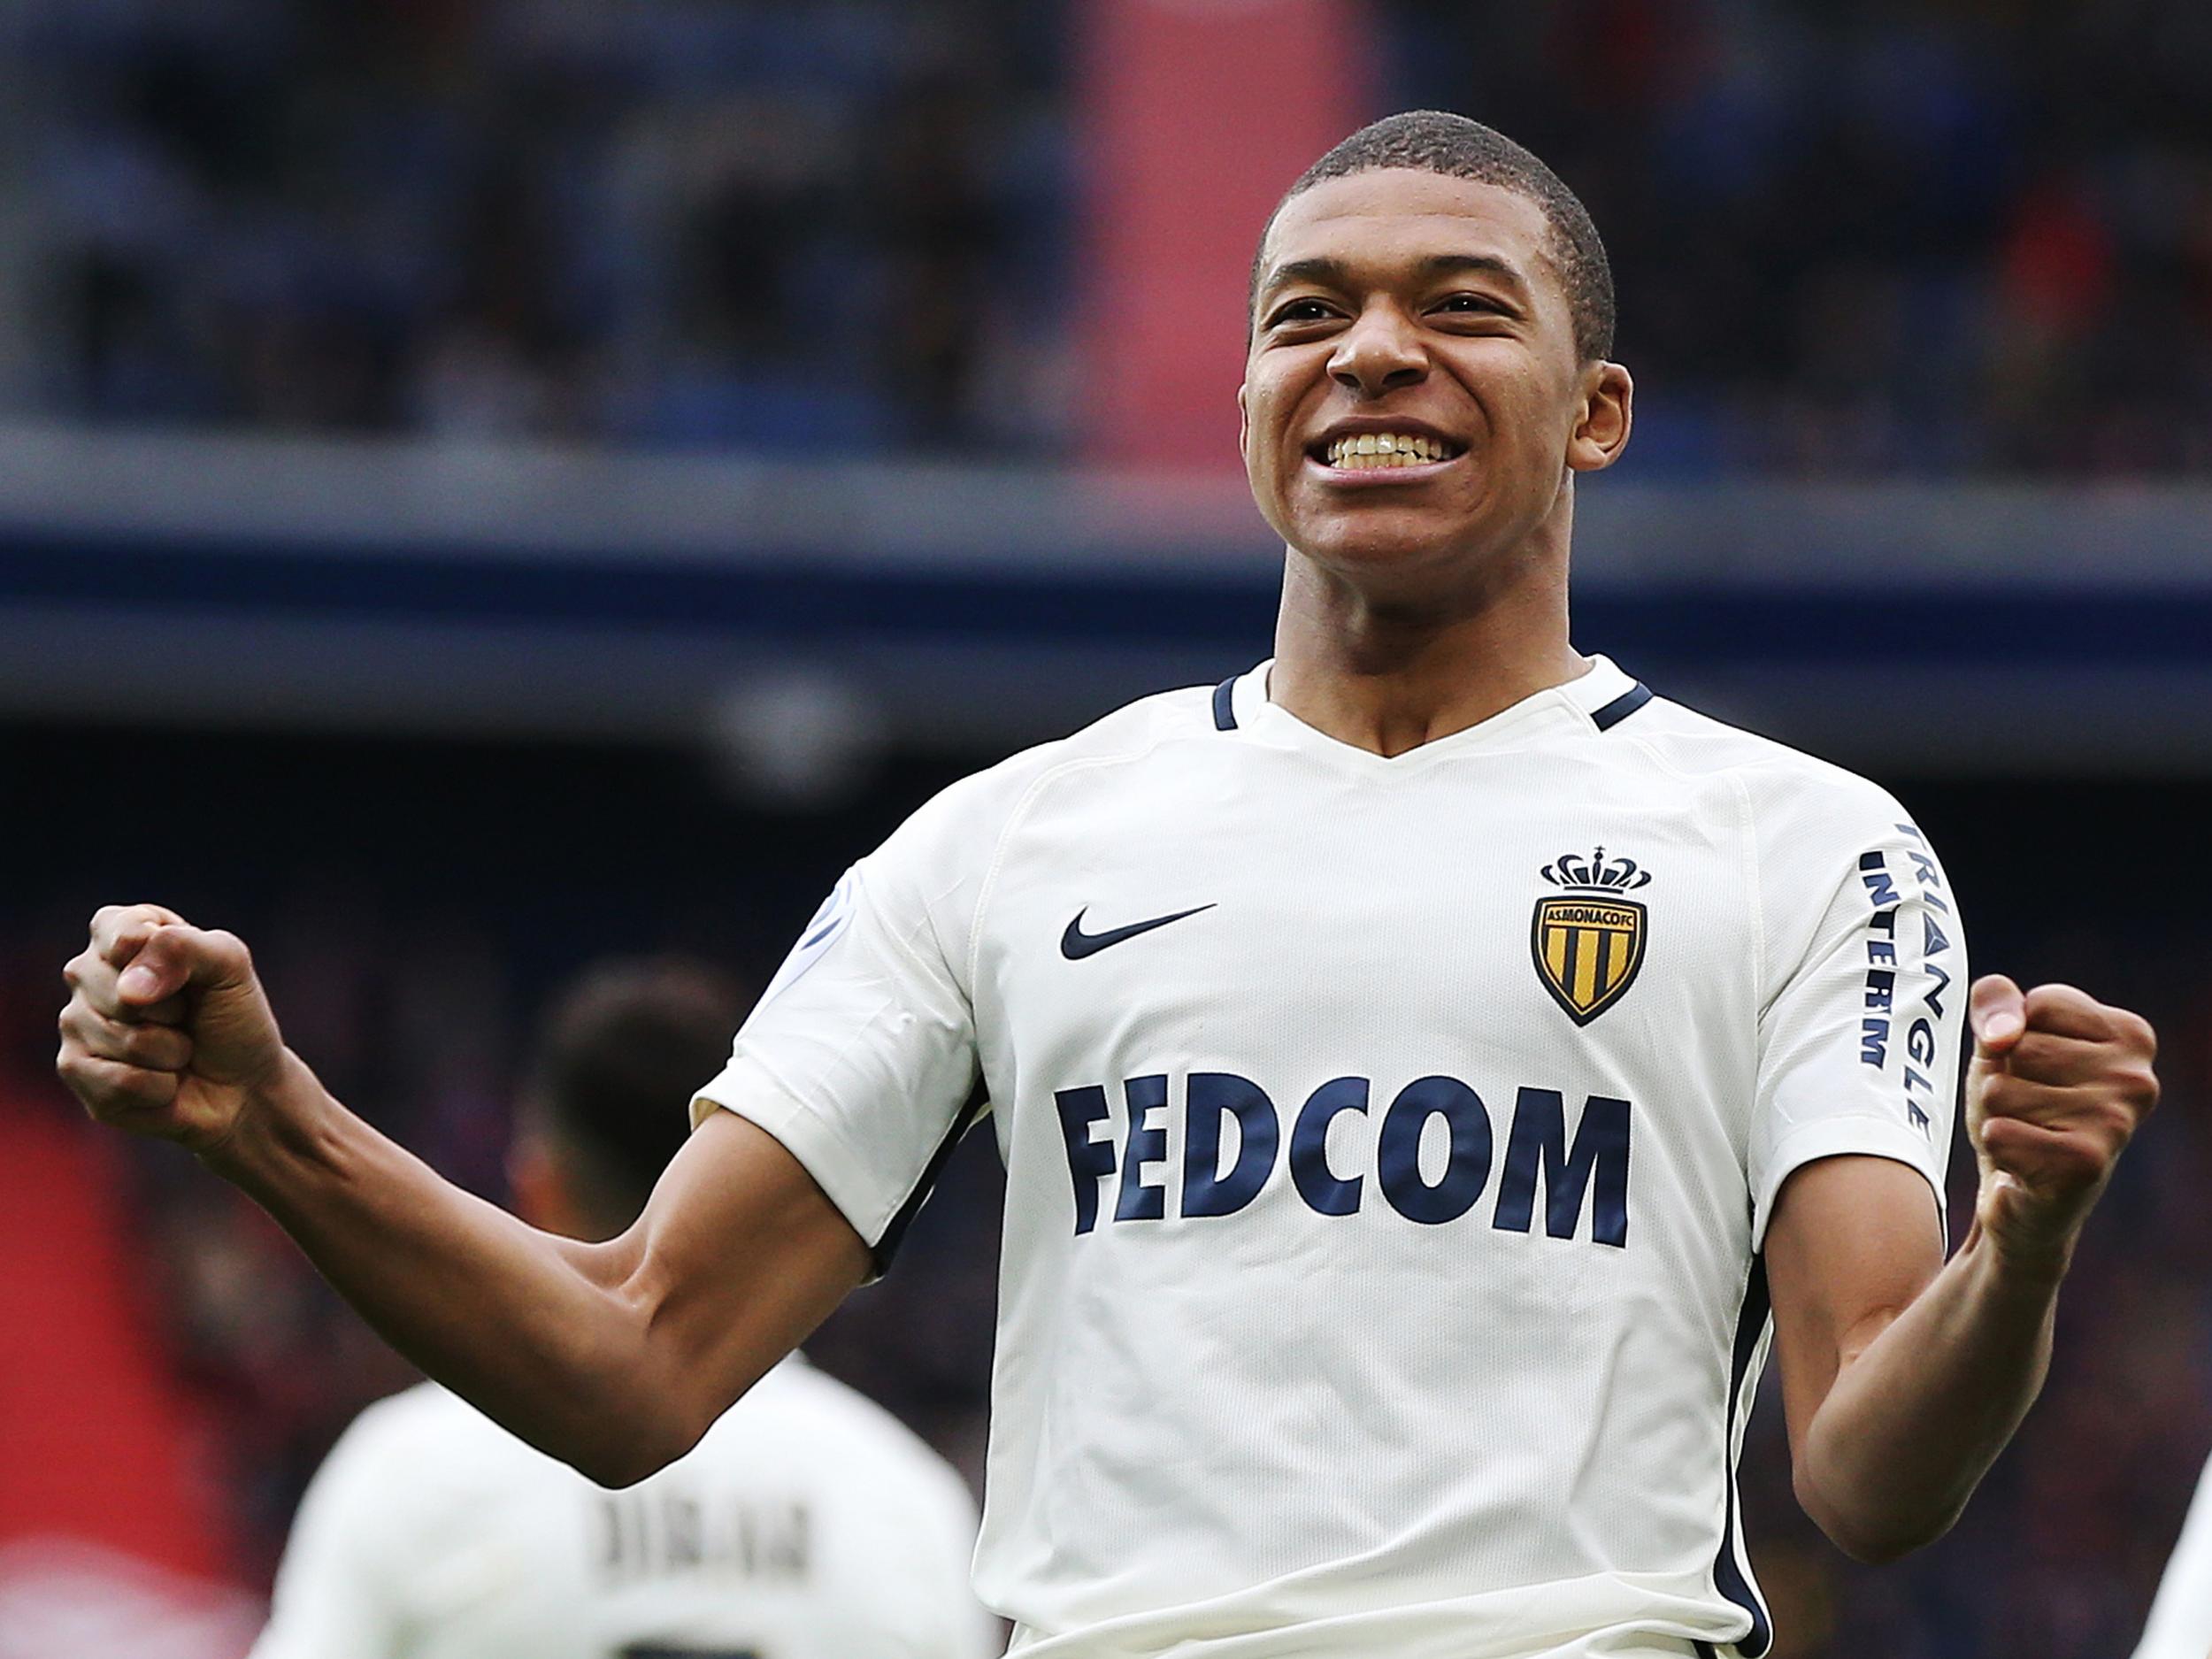 There are few players in Europe as exciting as Mbappé